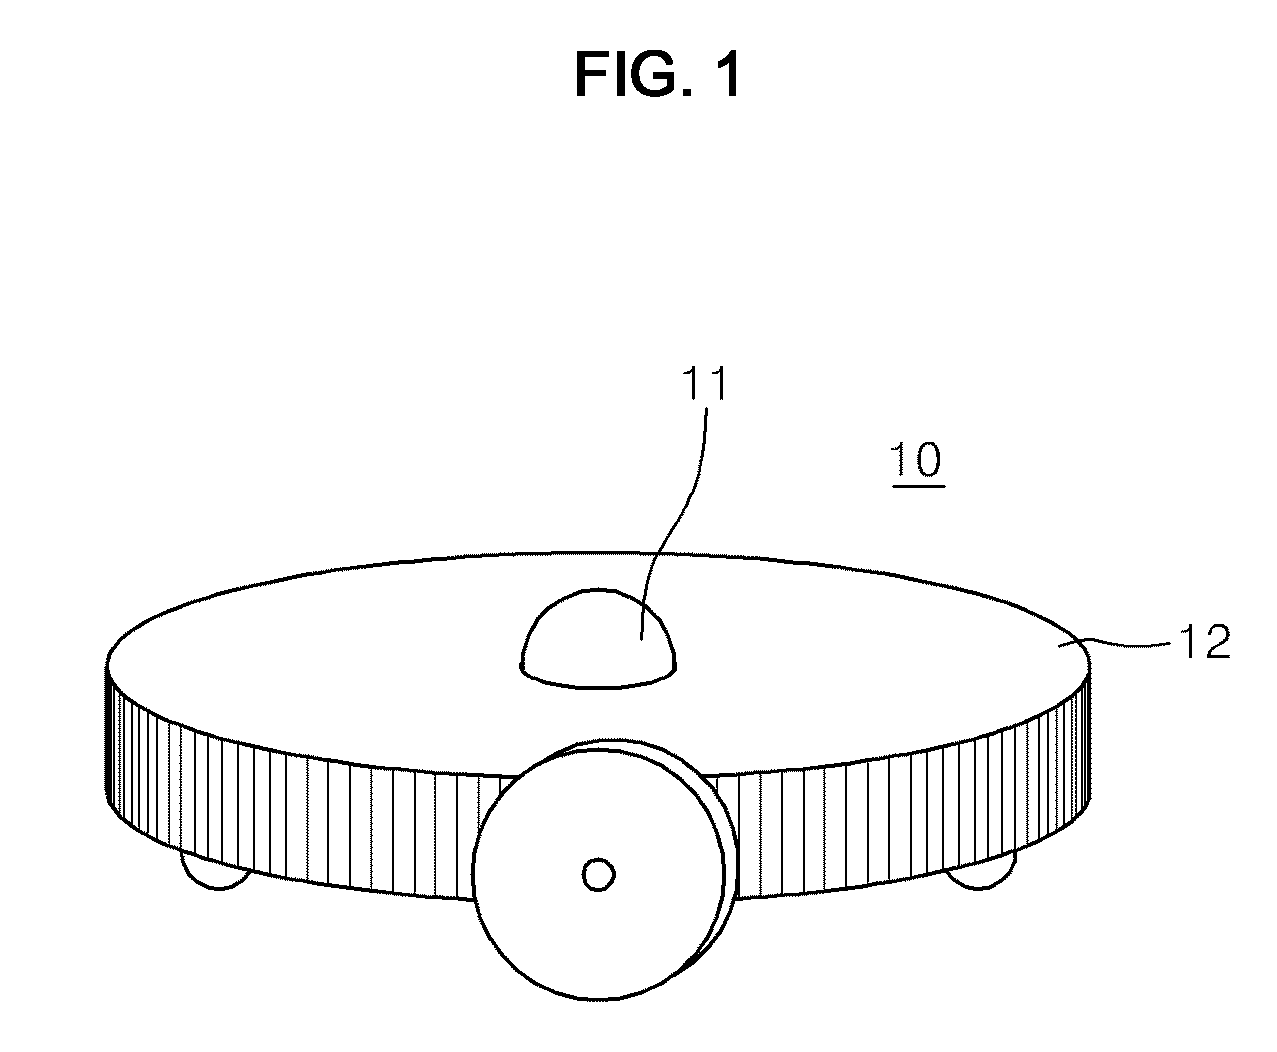 Method and apparatus to determine robot location using omni-directional image